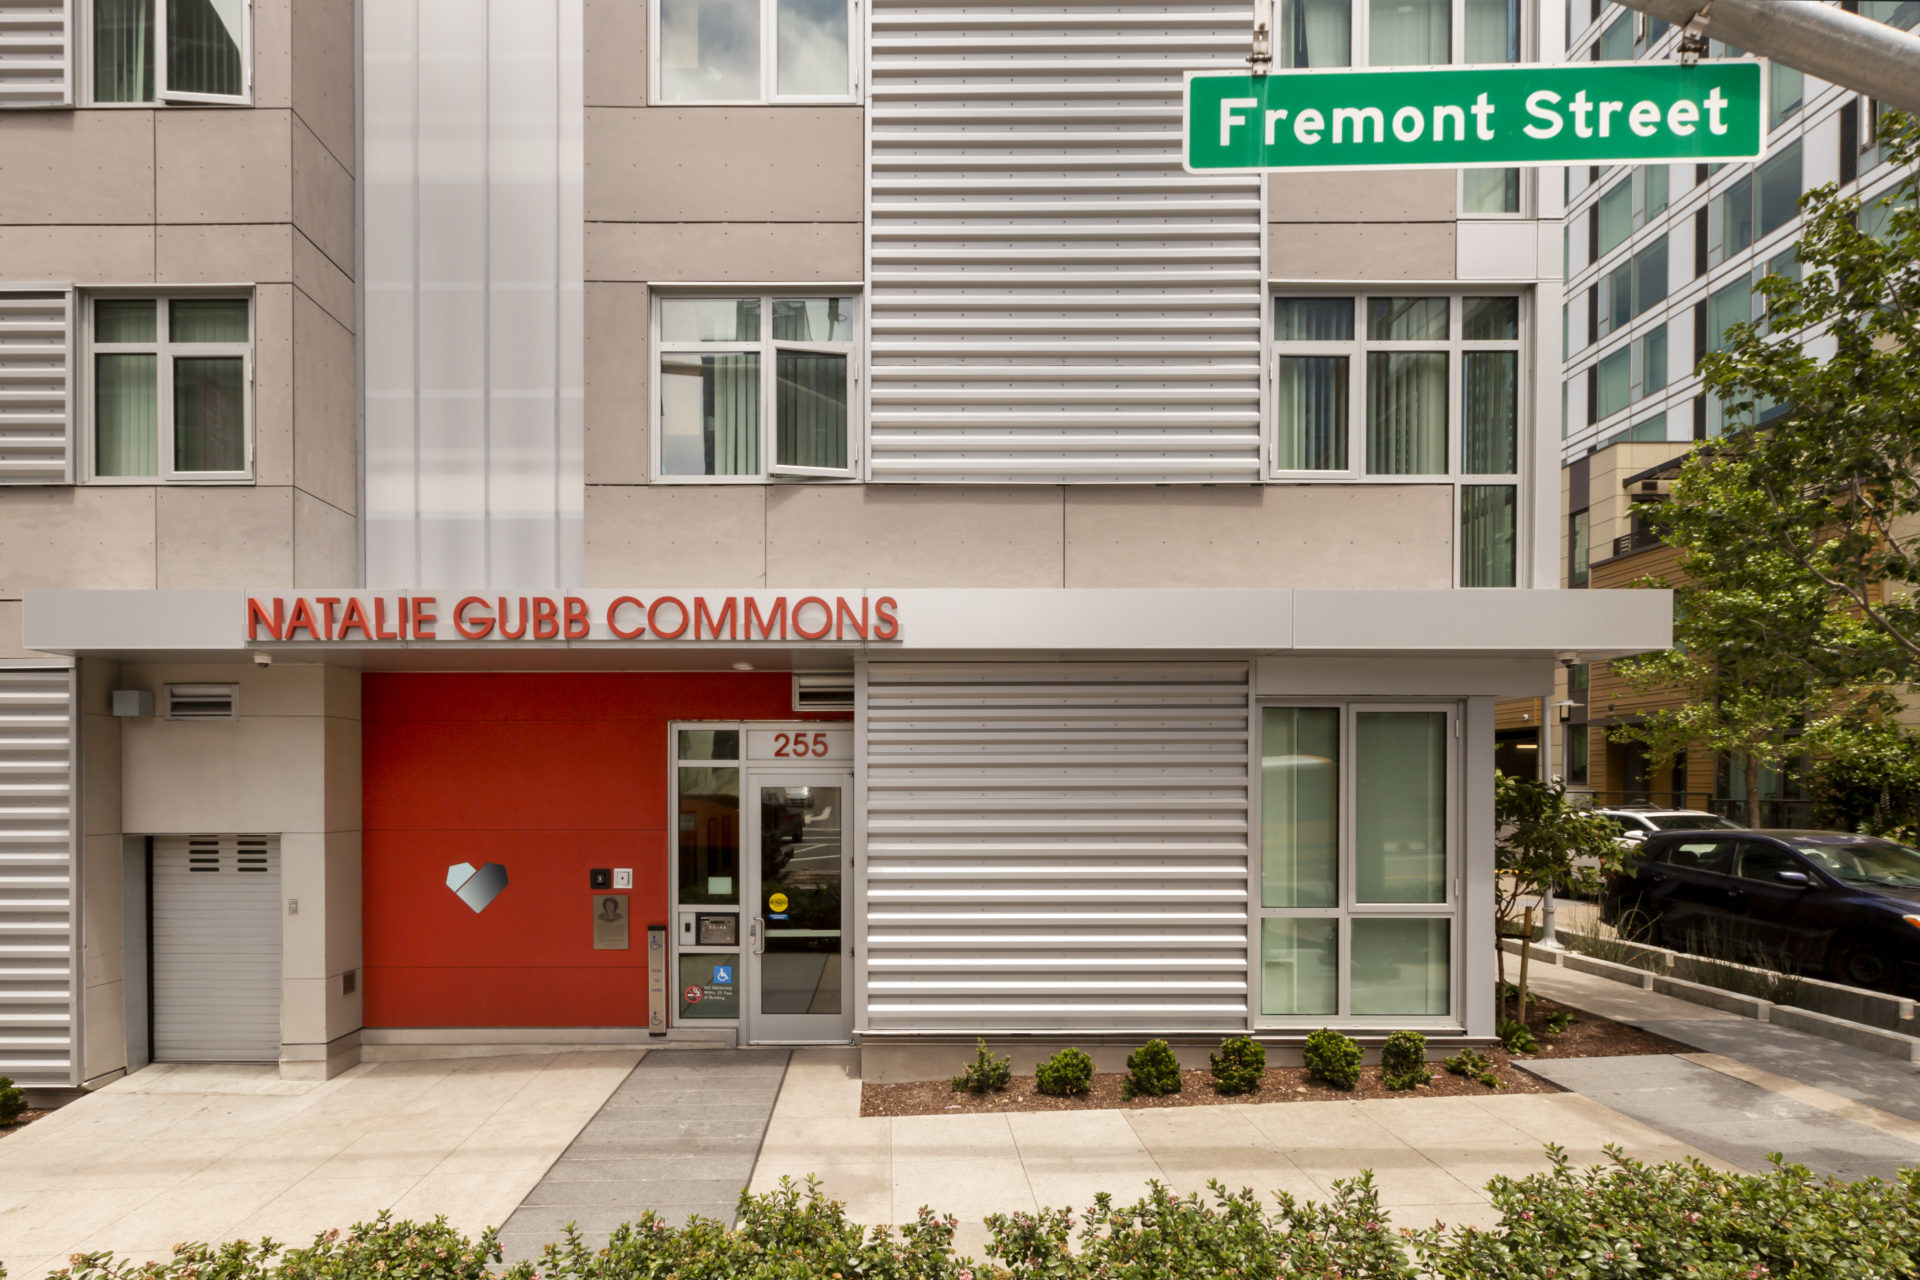 Cahill Contractors Affordable Housing Experience: Natalie Gubb Commons